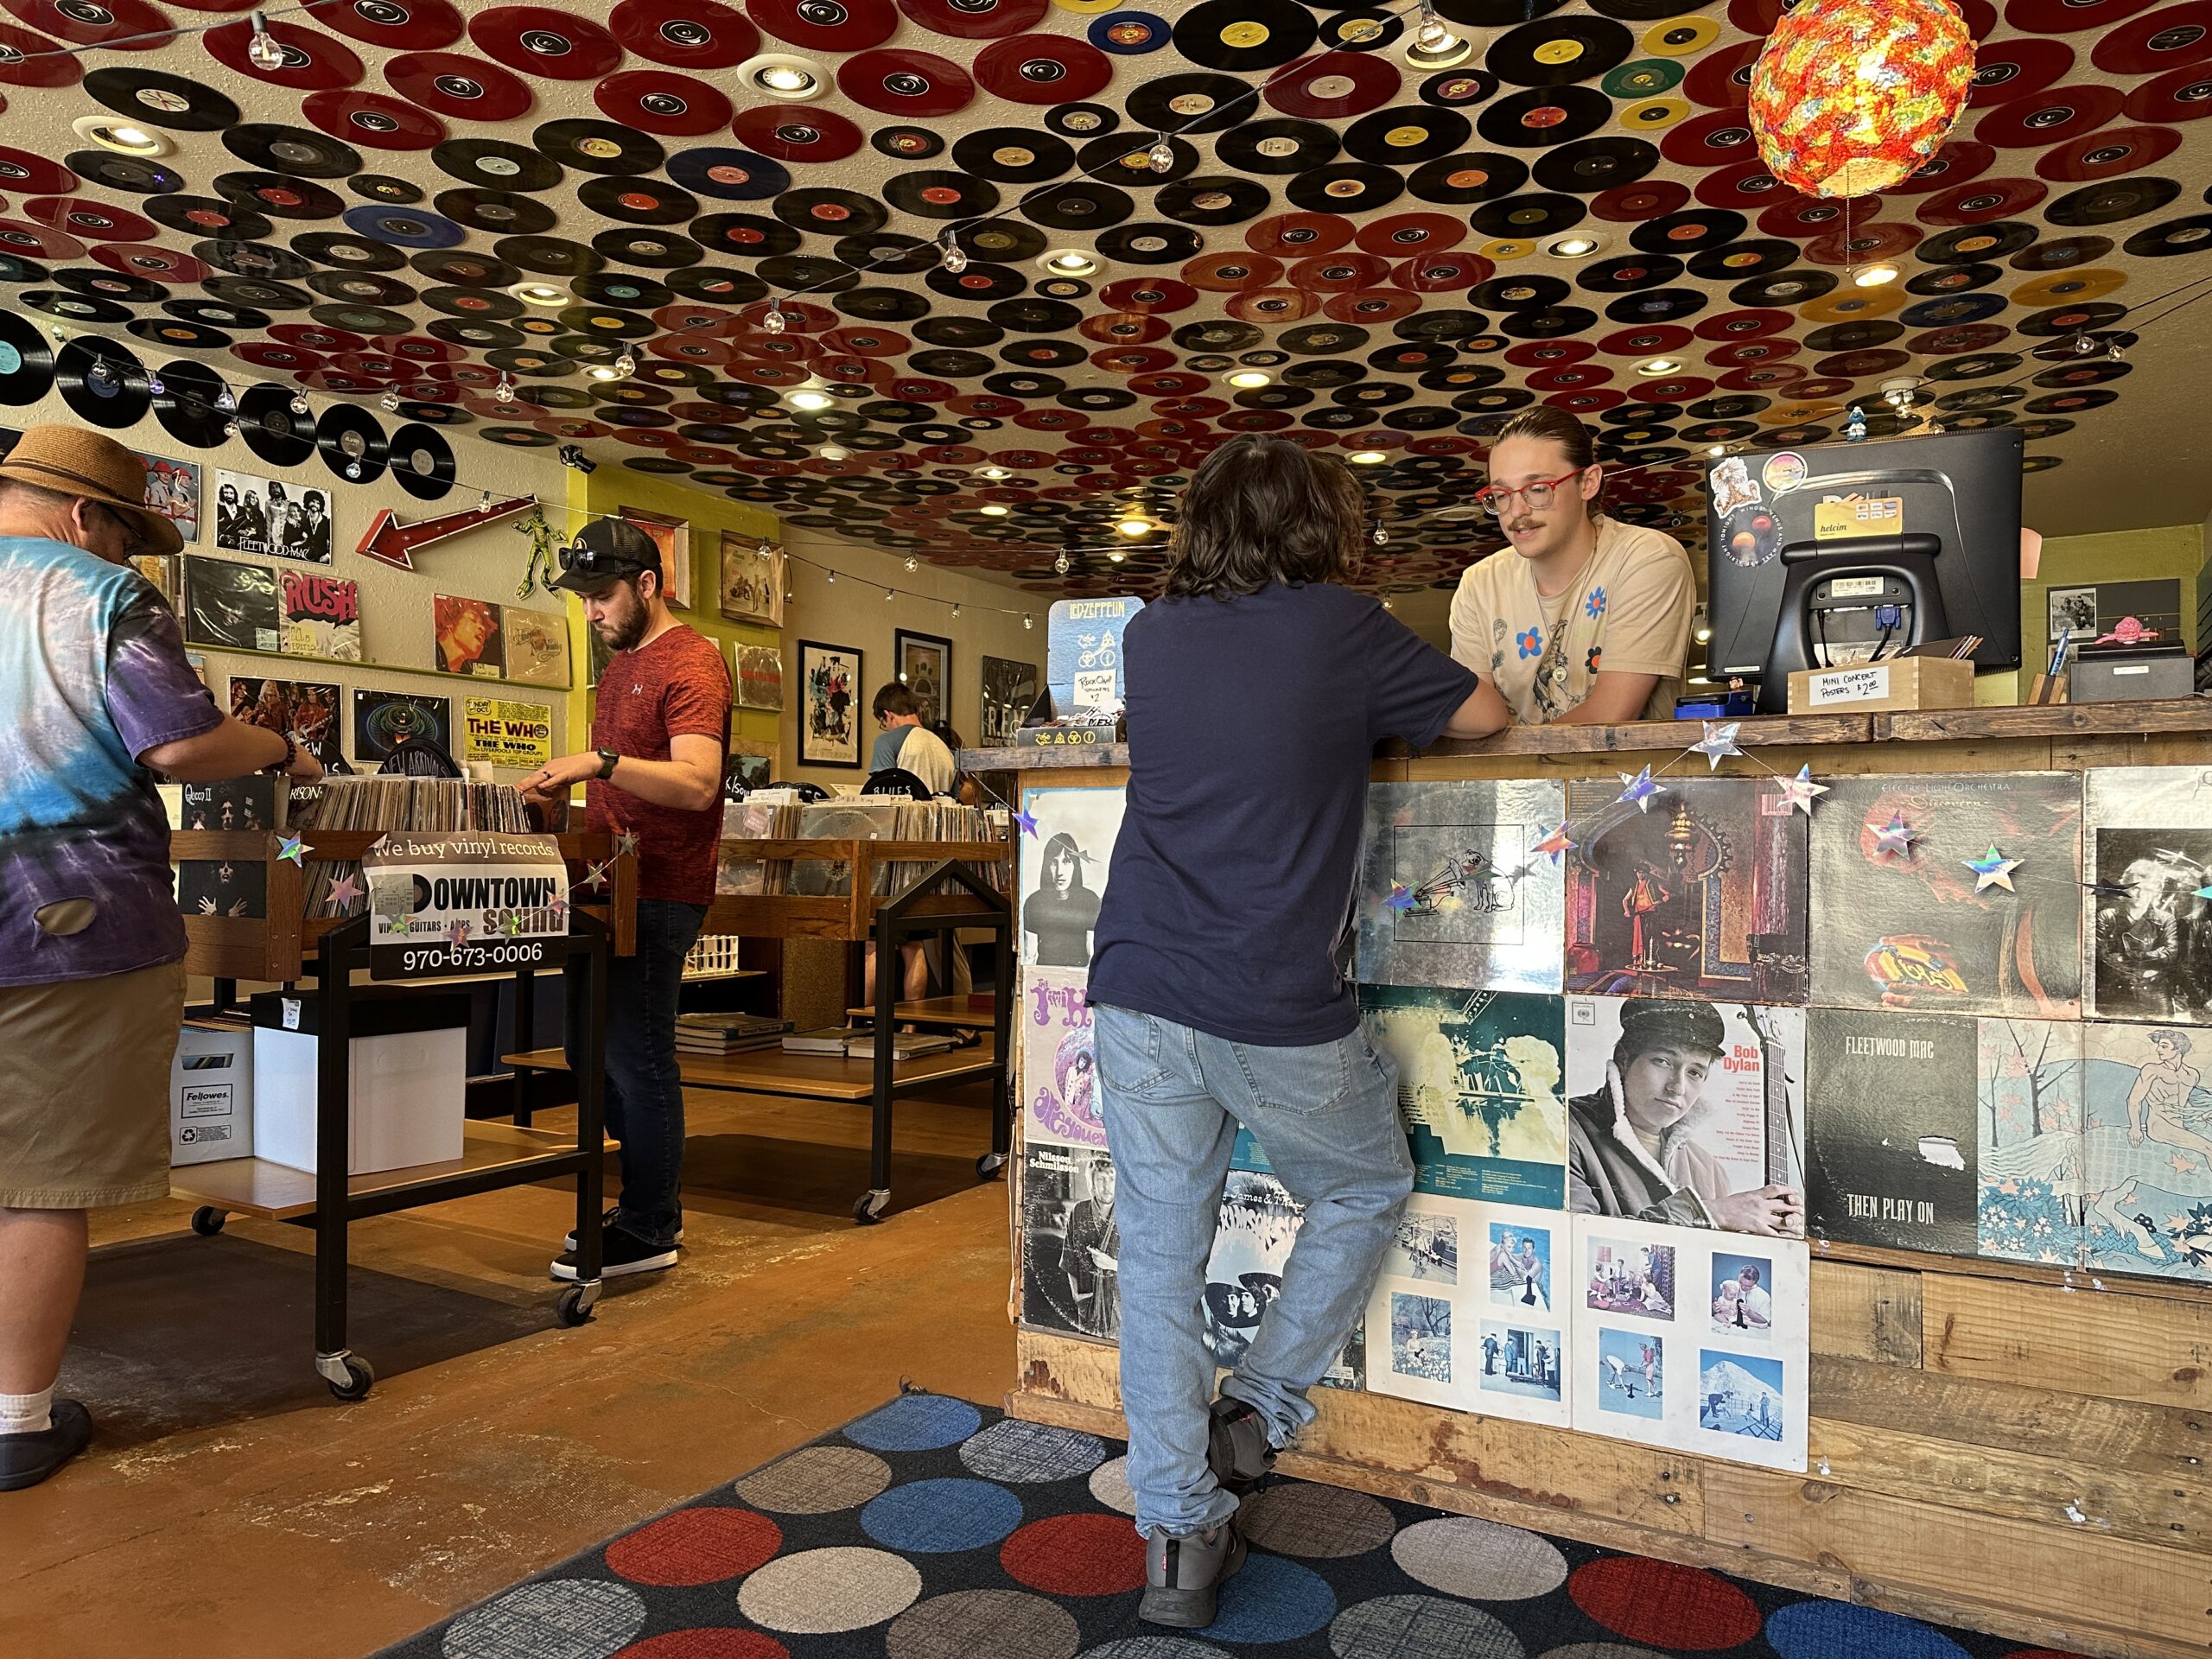 From behind the counter, Ben Jankow, whose parents own the Downtown Sound record shop in Downtown Loveland, talks with his brother, Nicholas Jankow.